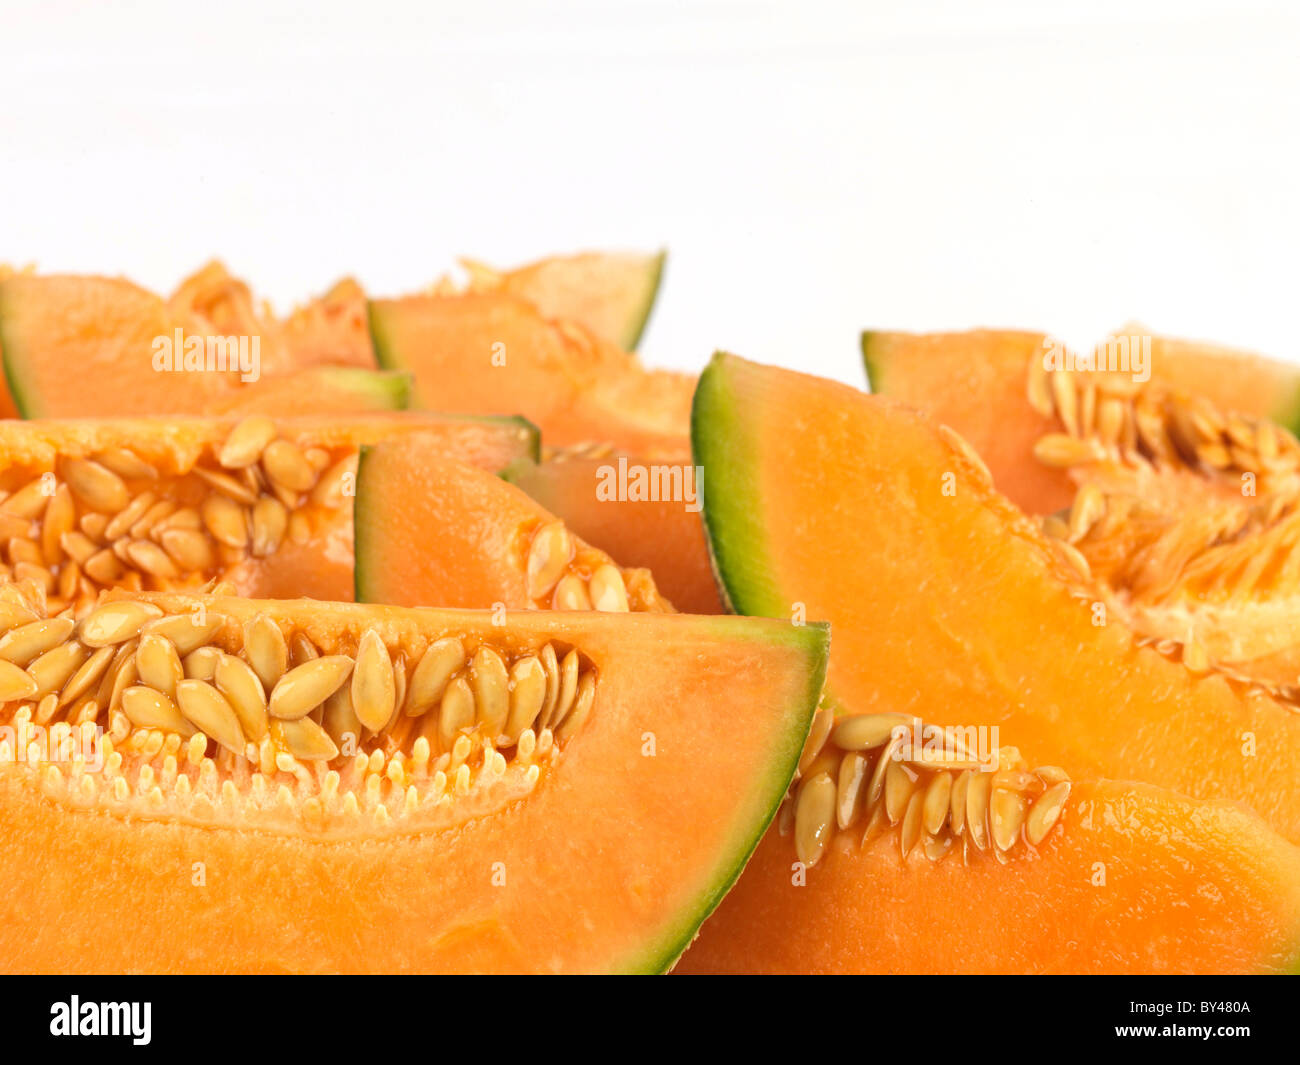 Freshly Cut Segments of A Fresh Healthy Orange Cantaloupe Melon In Close Up Against A White Background With Copy Space And No People Stock Photo